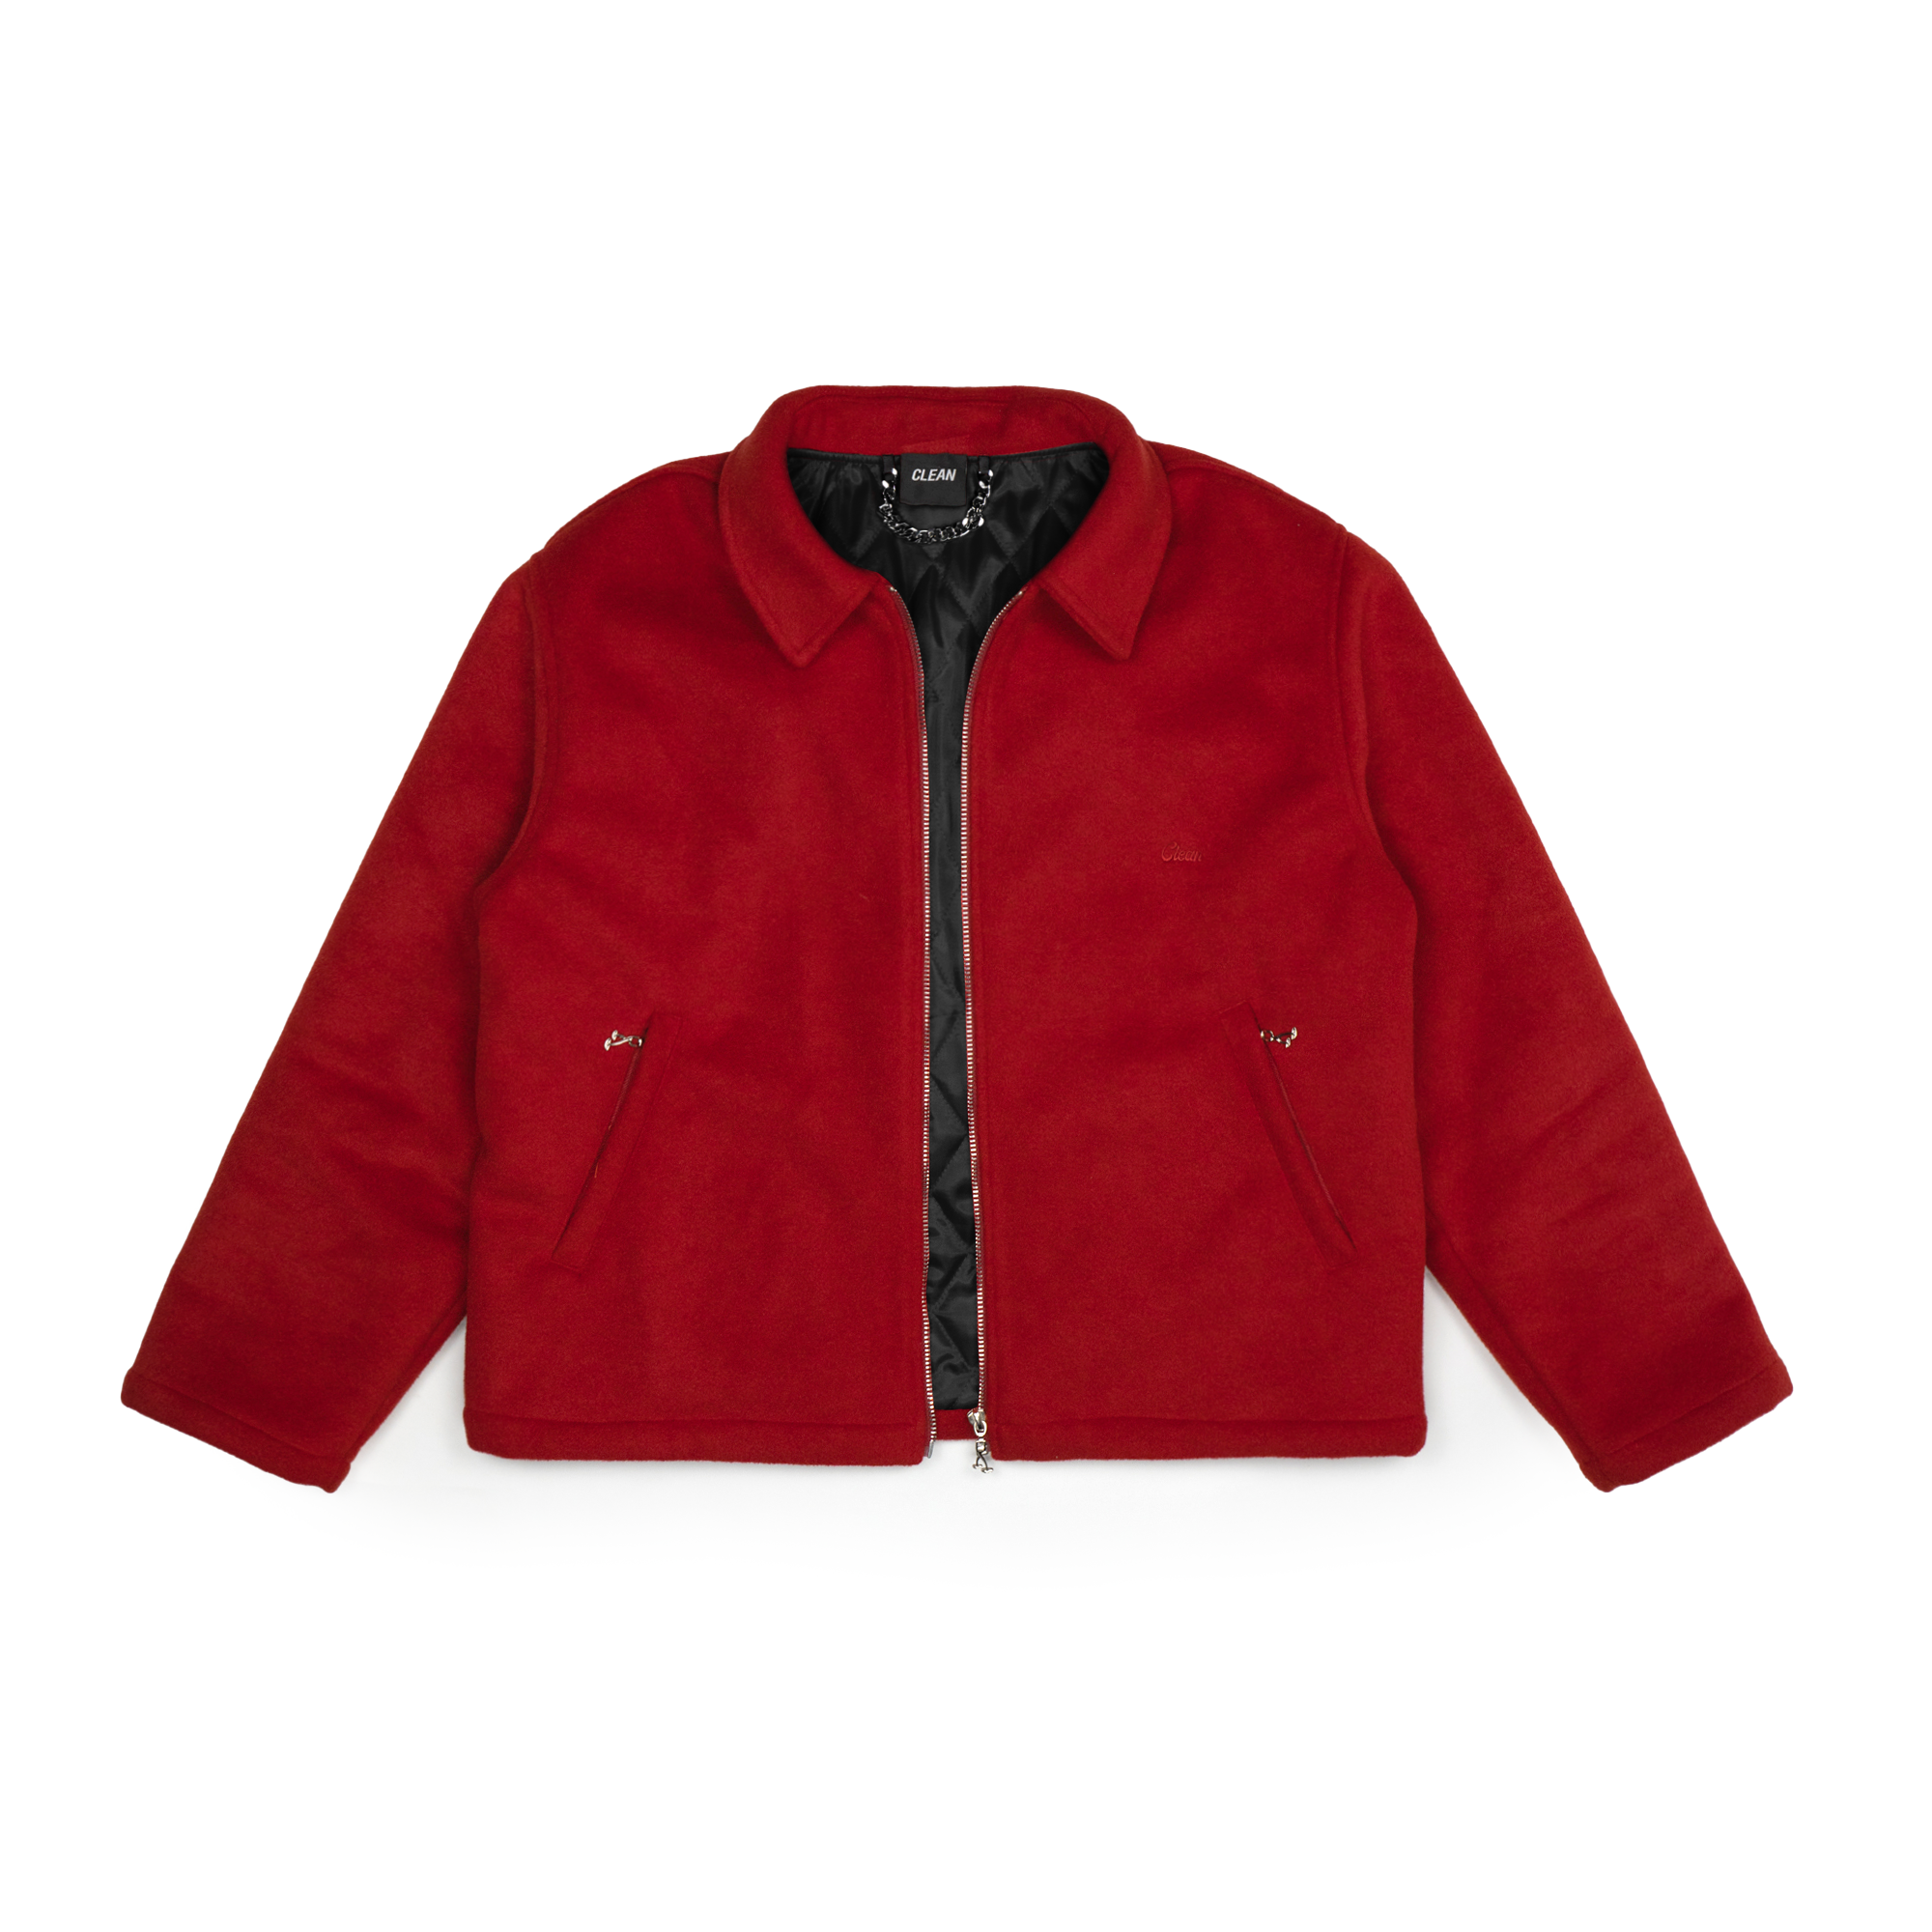 The Goodies Jacket in Red